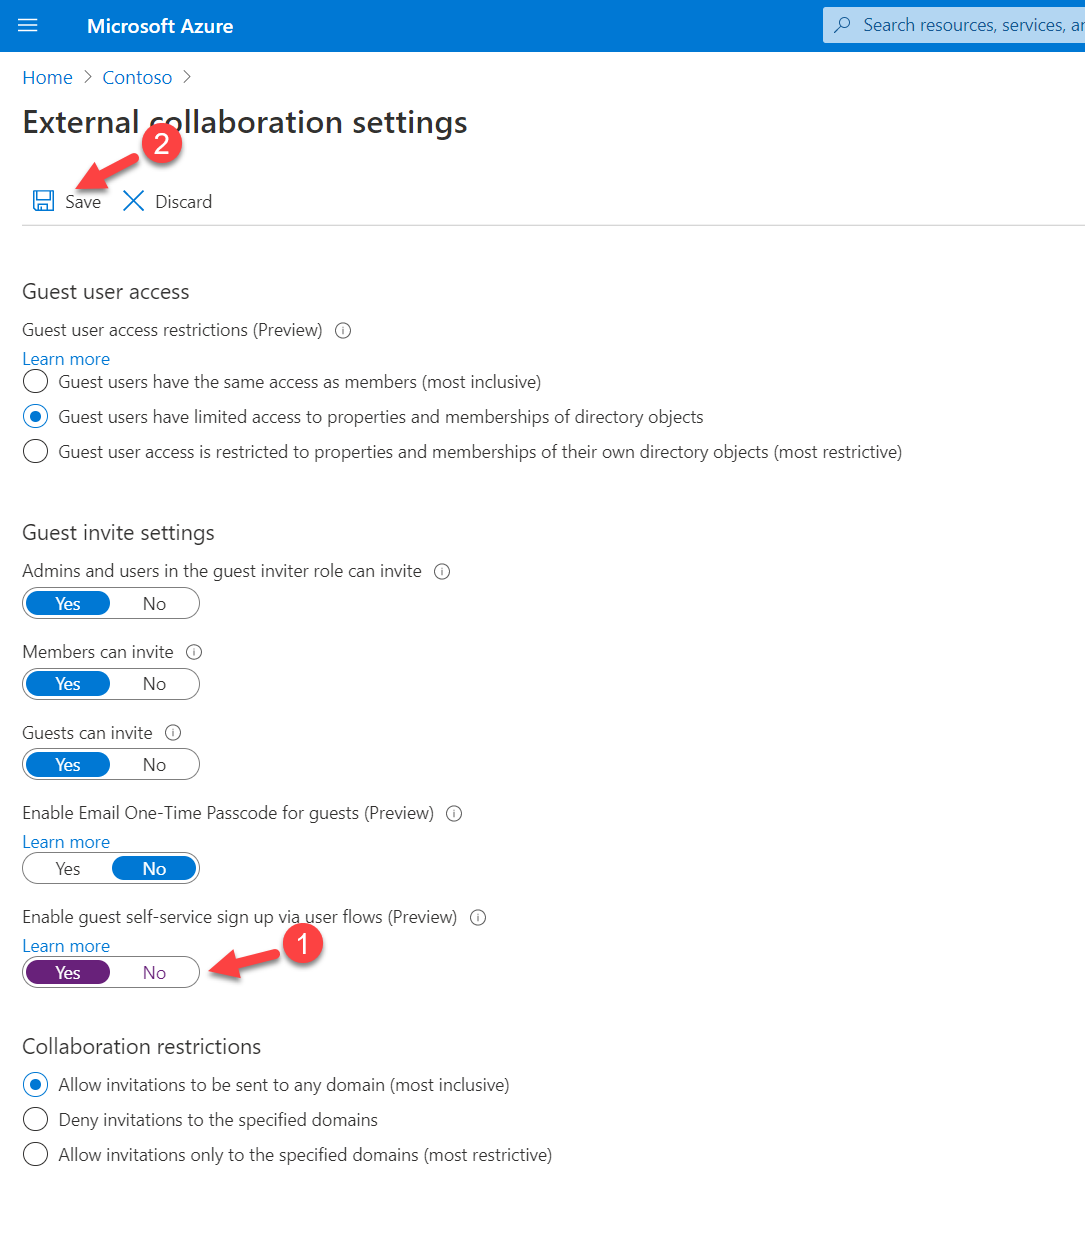 Enable guest self-service sign up via user flows